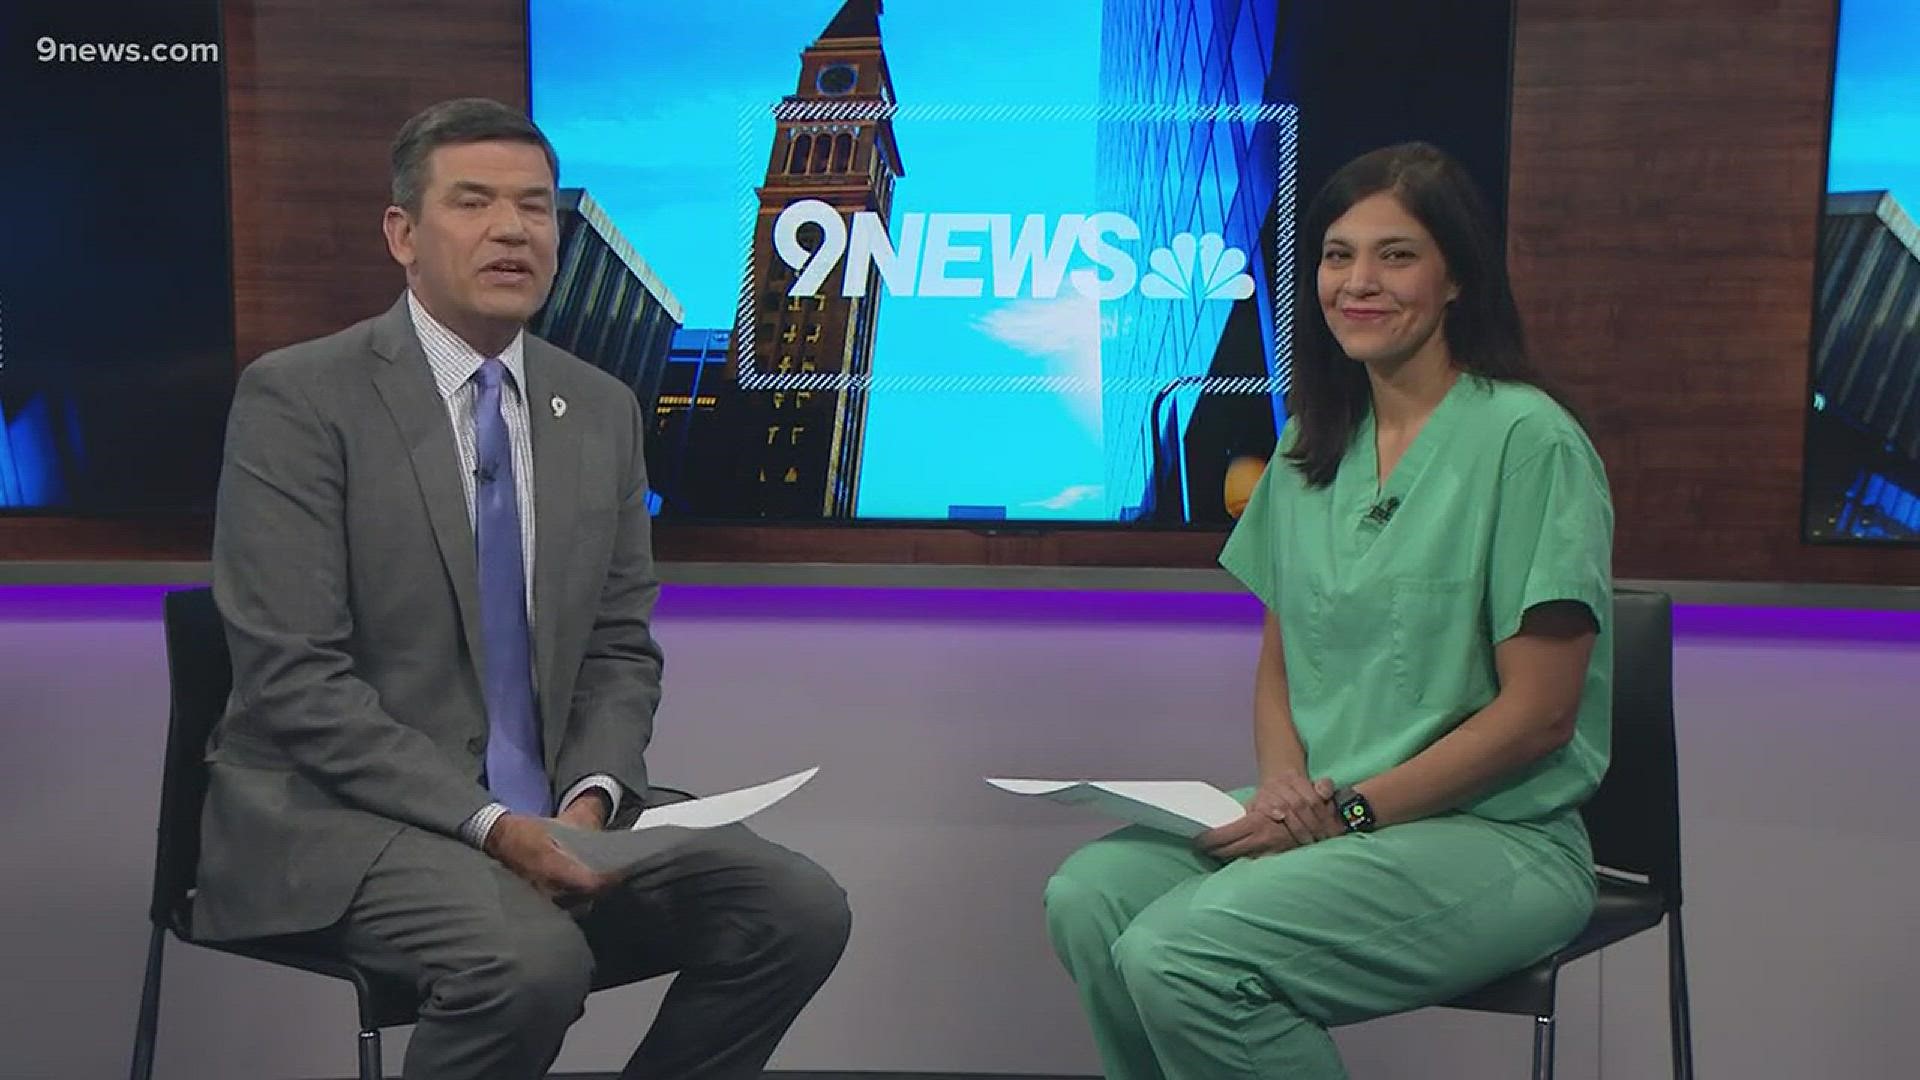 About half of all New Year's resolutions are related to health and losing weight. 9NEWS Medical Expert Dr. Comilla Sasson joined us with 9 tips to help you stick to those resolutions.